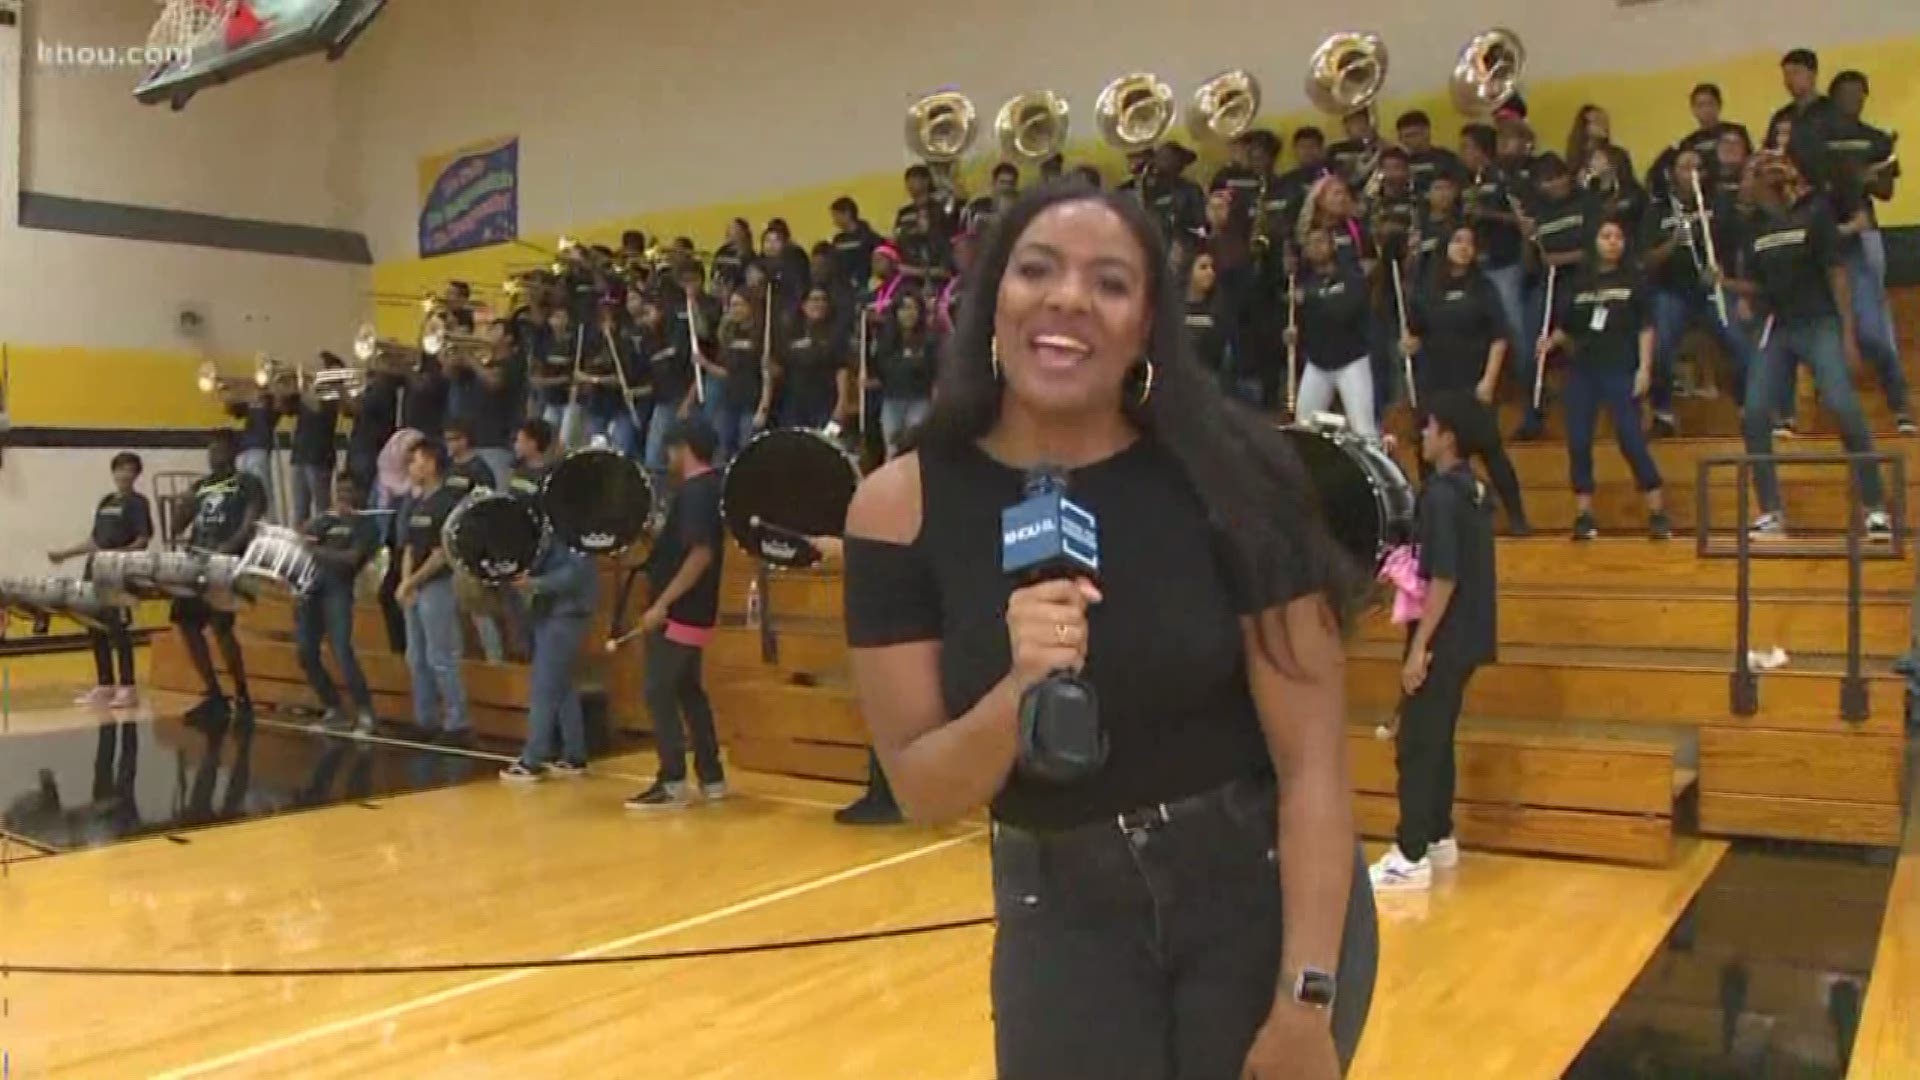 It's another Pep Rally Friday! Janel Forte was live at Alief Hastings High School as they prepare for their rivalry game against Alief Taylor High School.